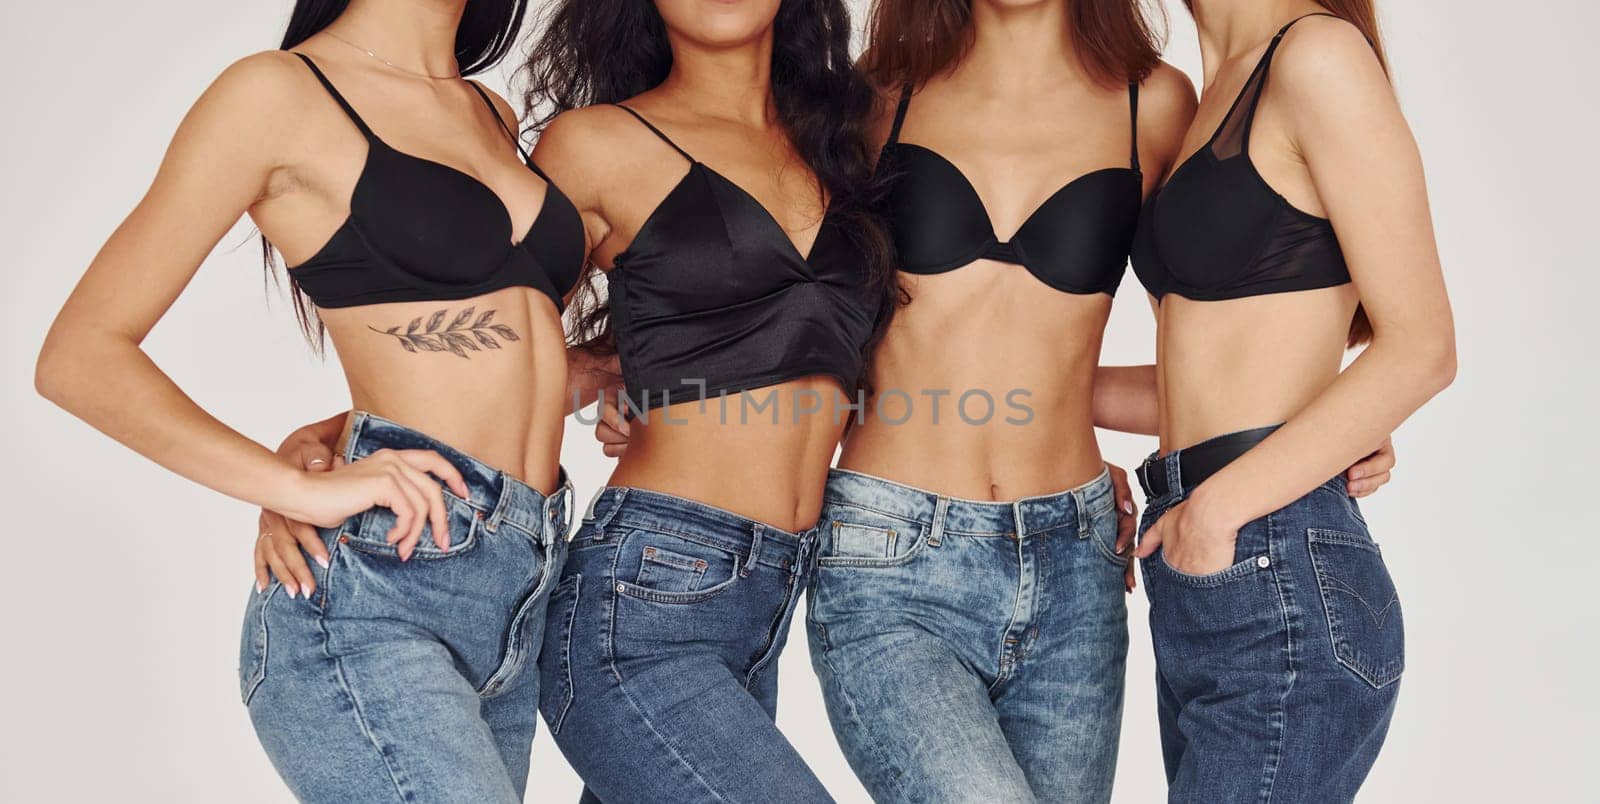 Close up view of bodies. Four young women in lingerie together indoors. White background by Standret